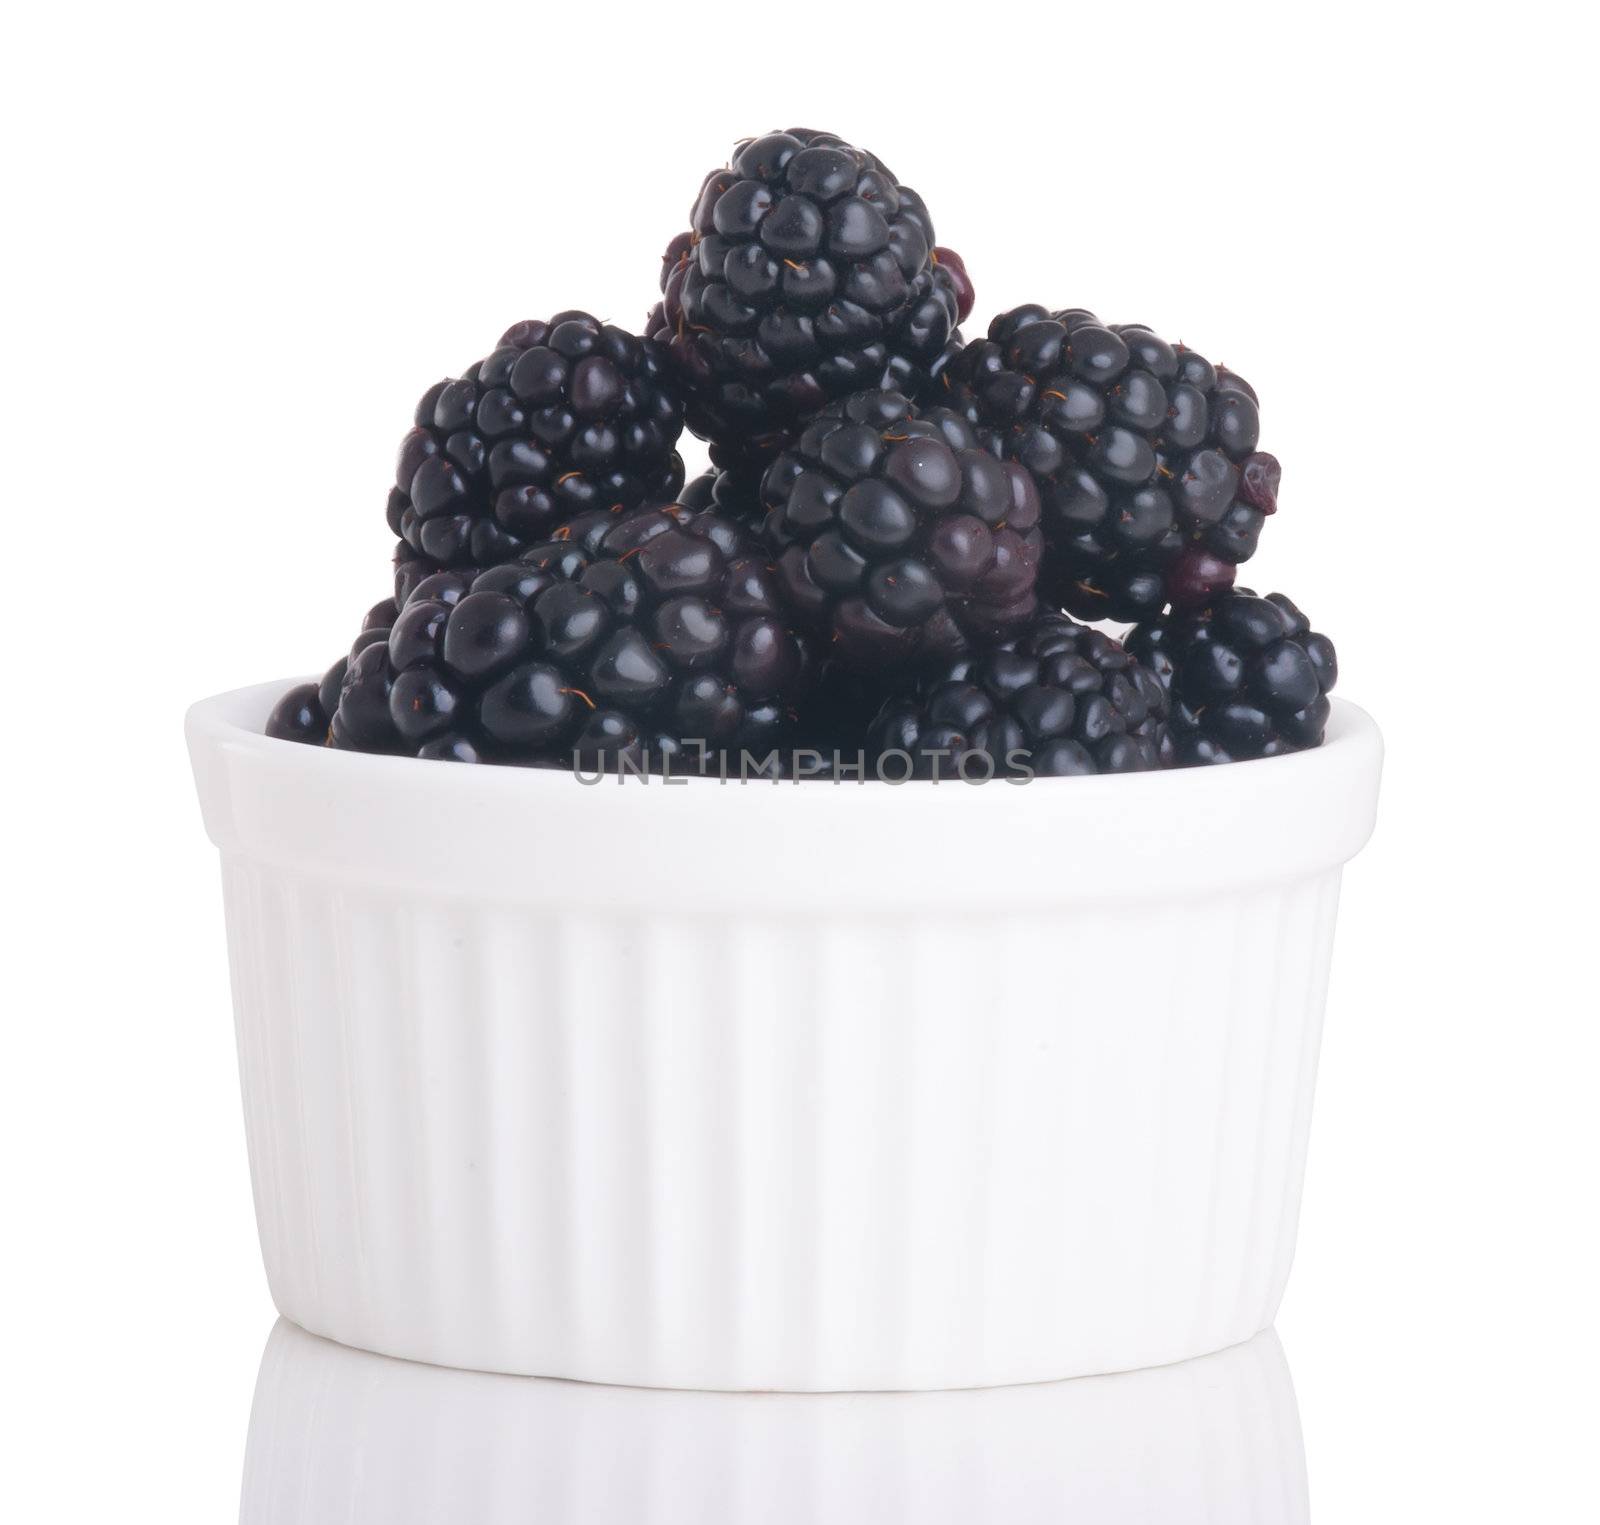 blackberry isolated on a white background by heinteh